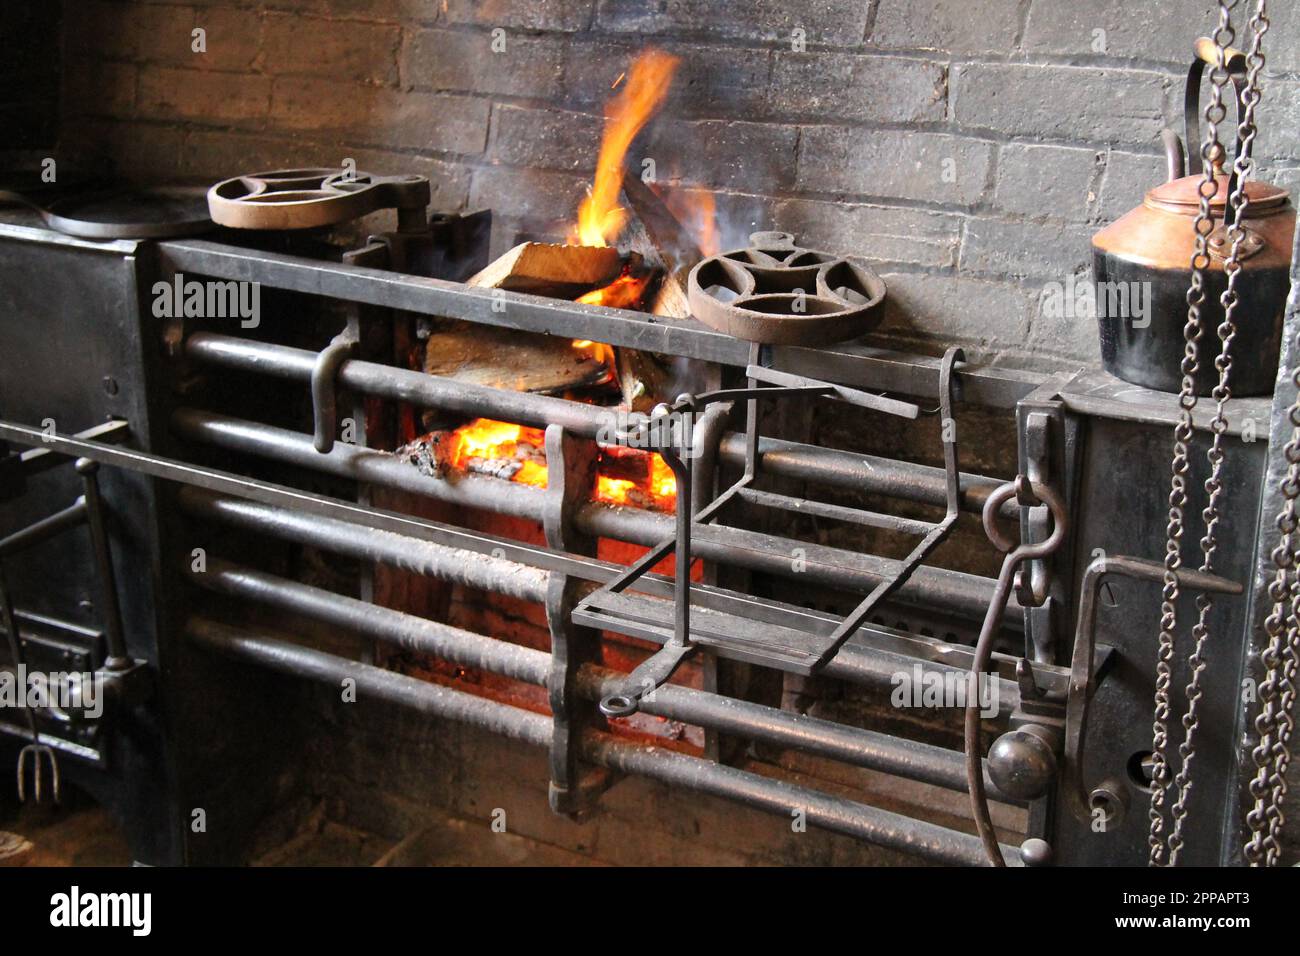 A Wood Fuelled Vintage Cooking Range with Fire. Stock Photo